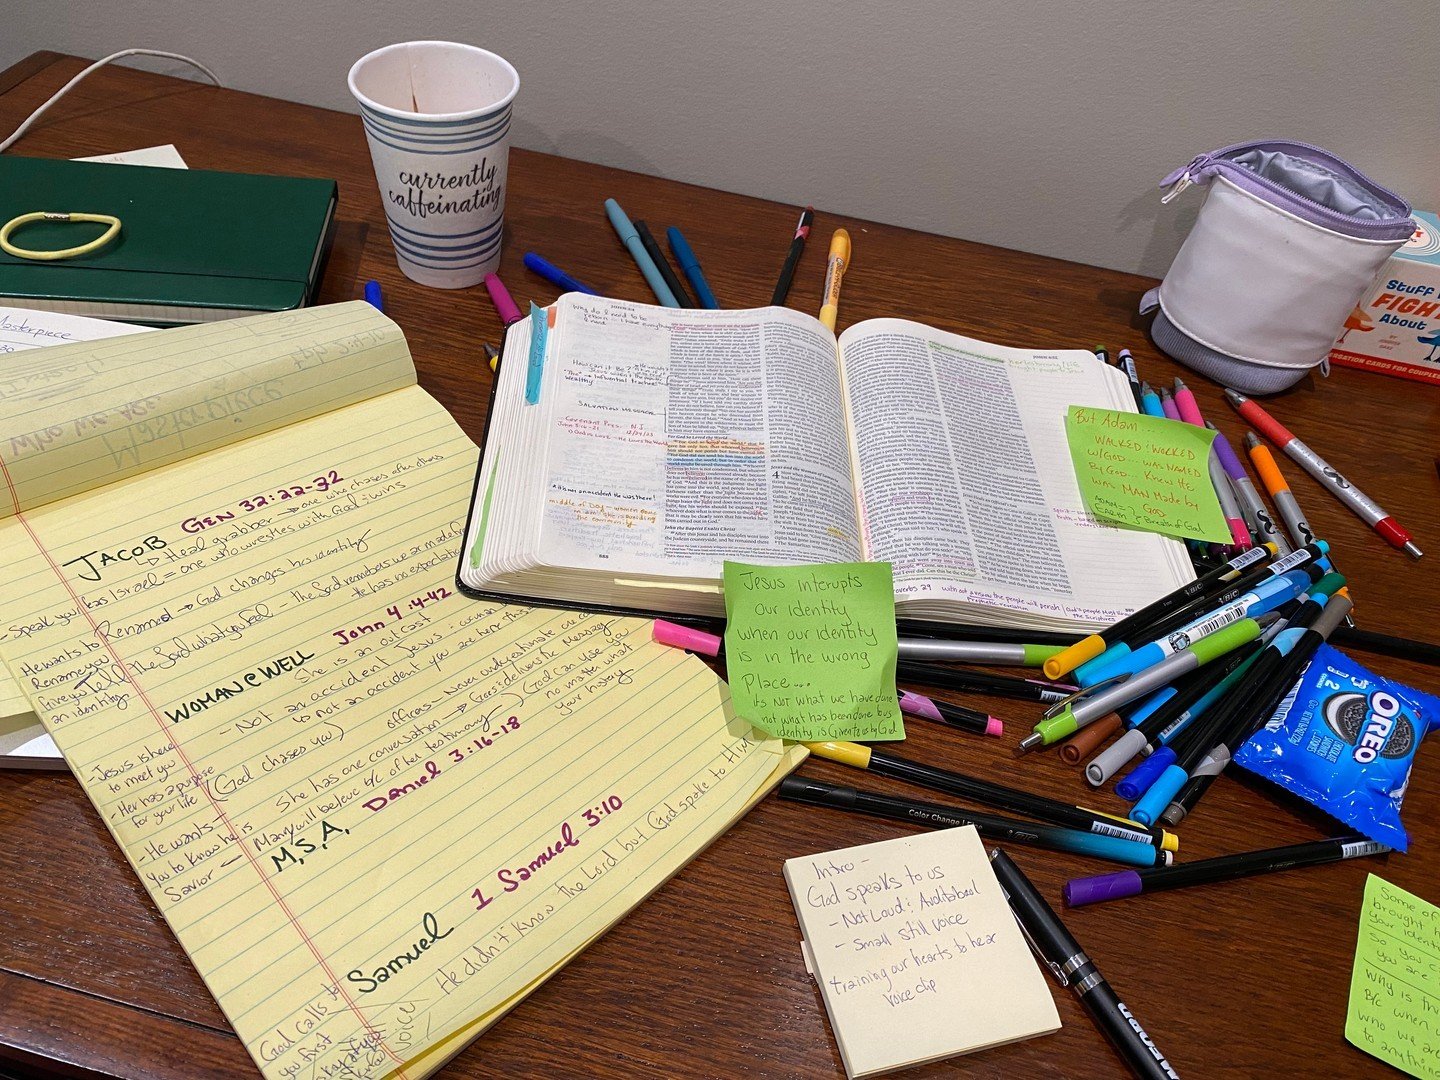 Early morning preparations for this morning&rsquo;s experiences of worship. (Sticky Notes, pens, and yellow legal pads are my jam!)

If you have seen me speak, you know my love for a yellow legal pad! I was asked why the yellow pad. Honestly, I would